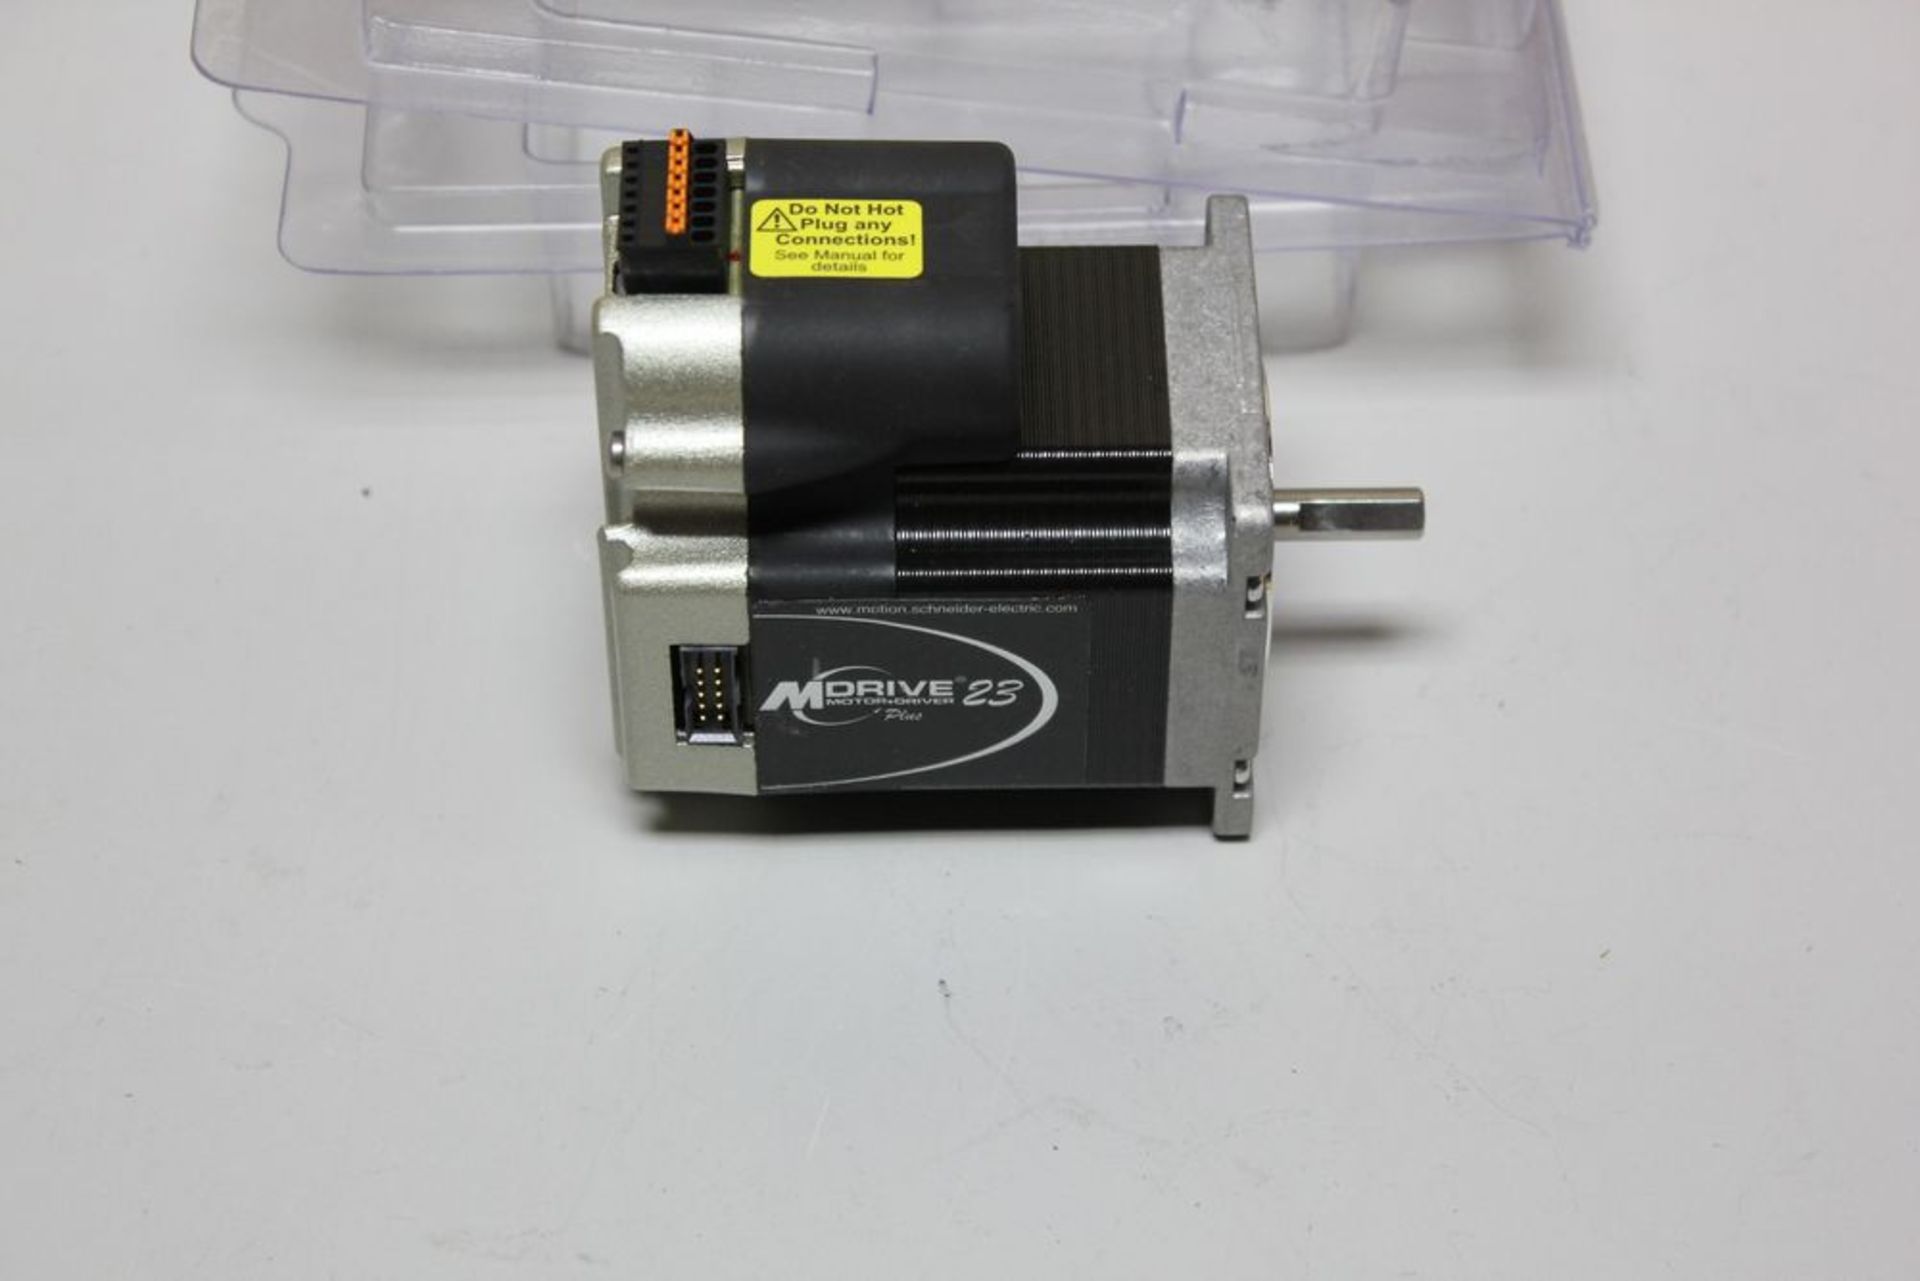 NEW SCHNEIDER MDRIVE 23 PLUS STEPPER MOTOR & DRIVE - Image 4 of 5